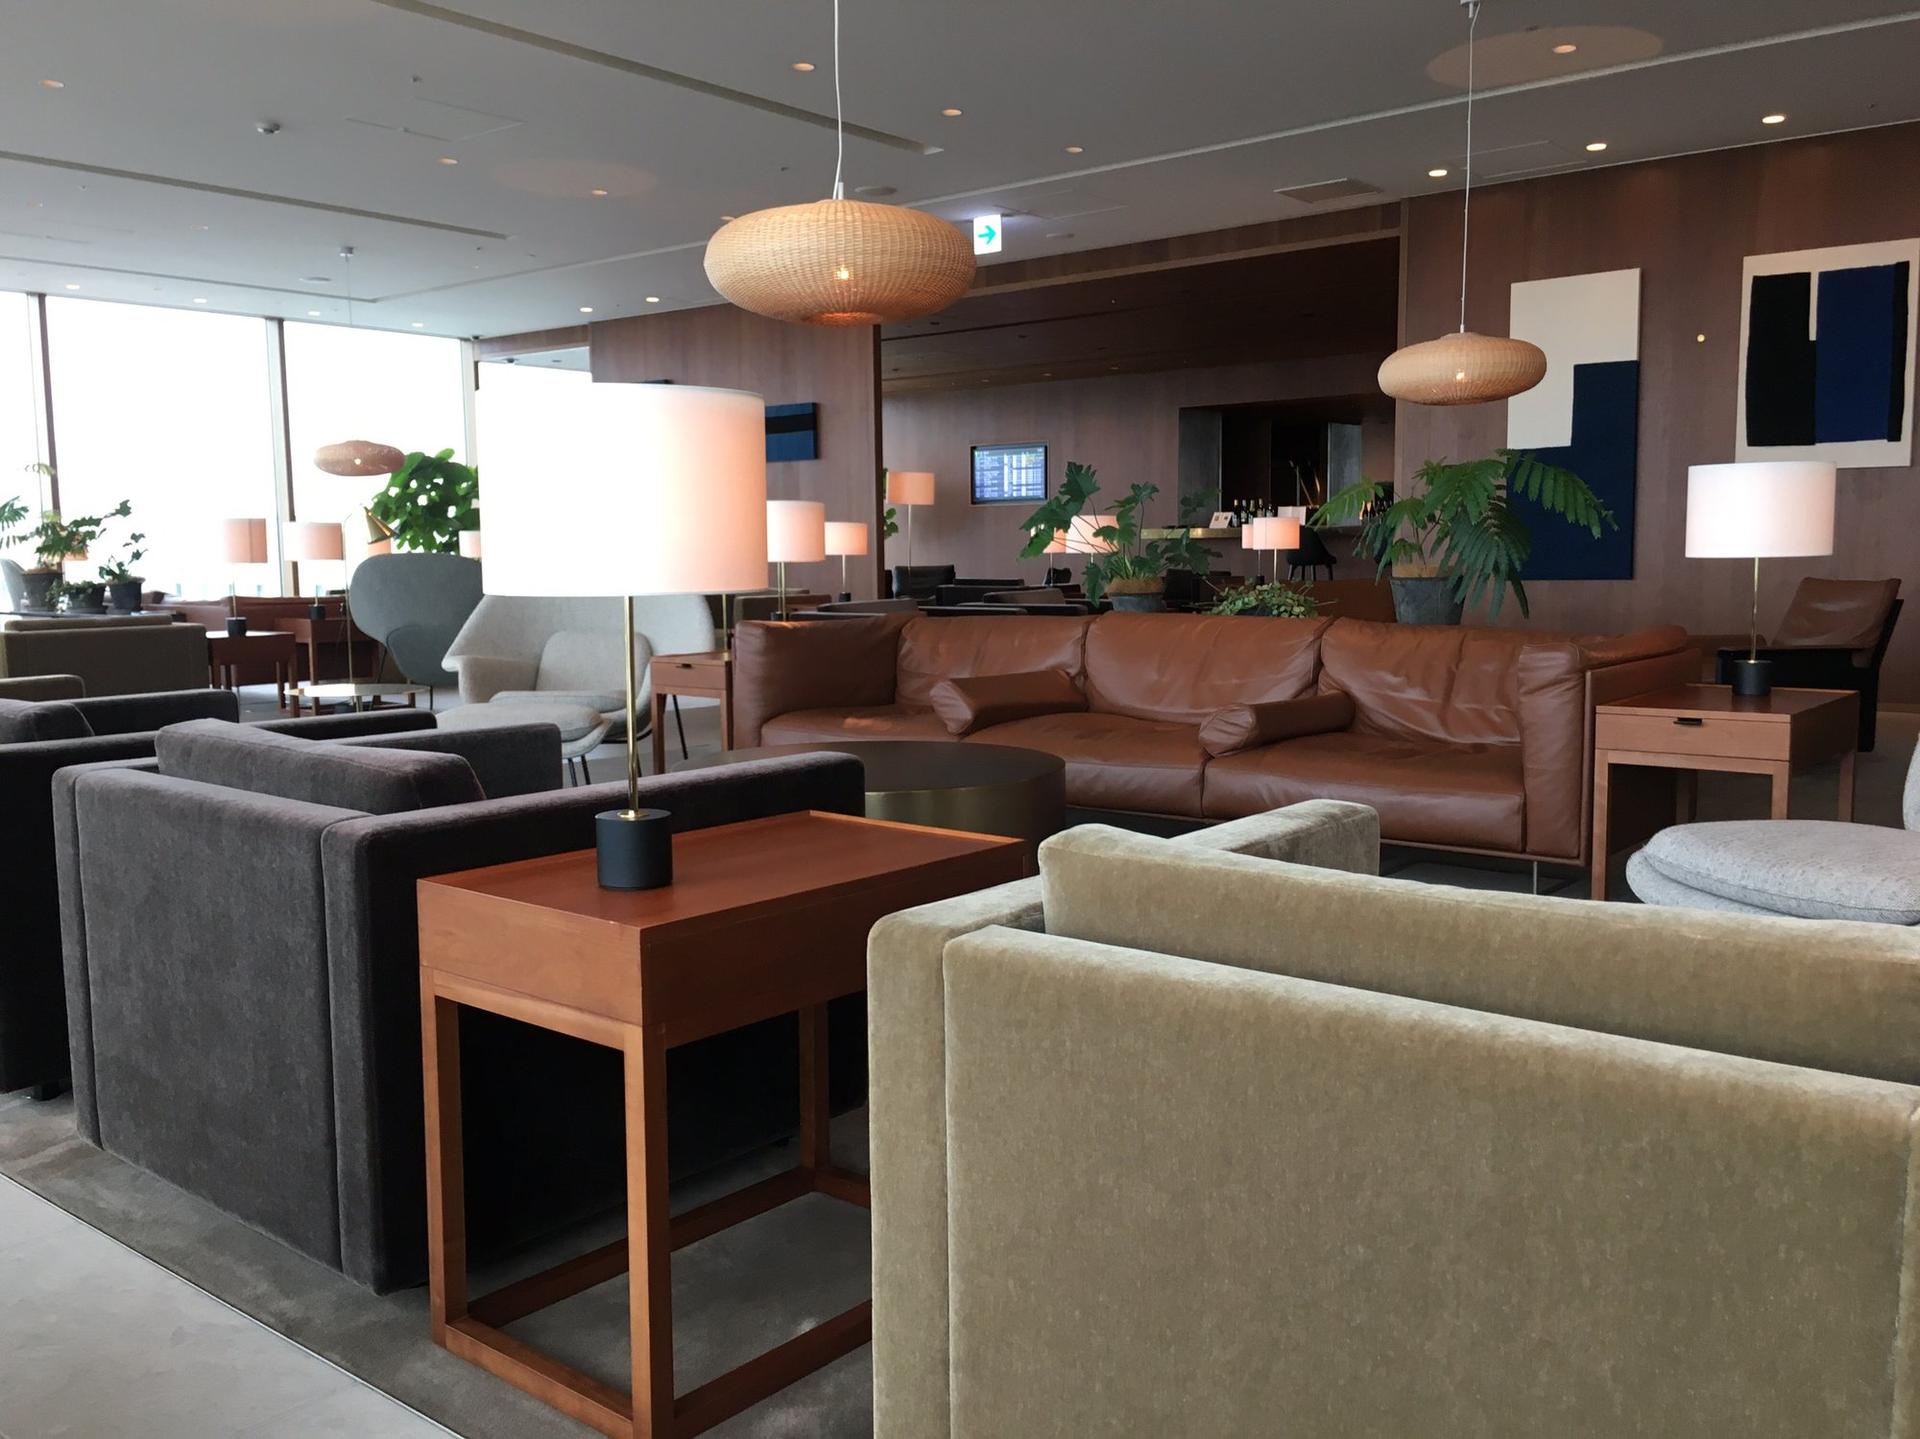 Cathay Pacific Lounge image 28 of 49